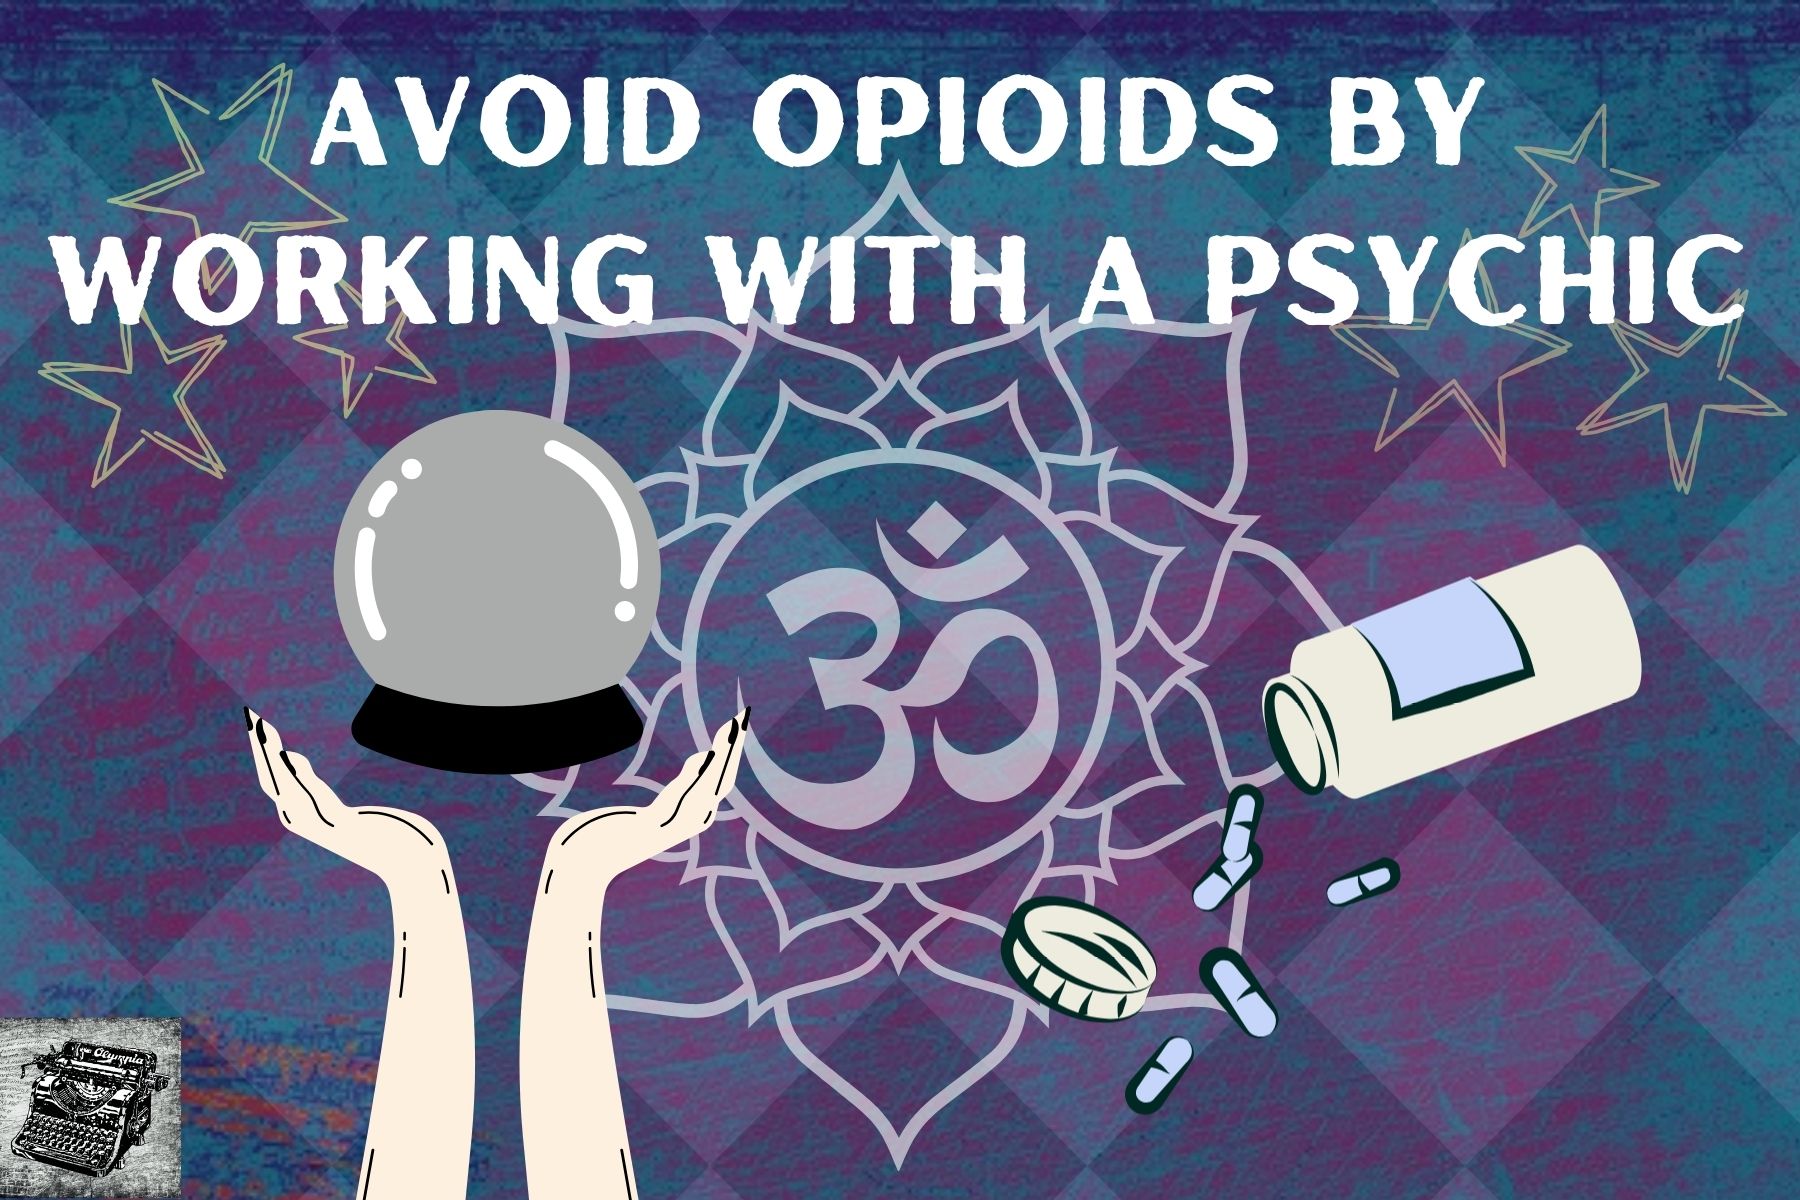 Working With Psychics & Spiritualist Healers To Avoid Opioids And Antidepressants